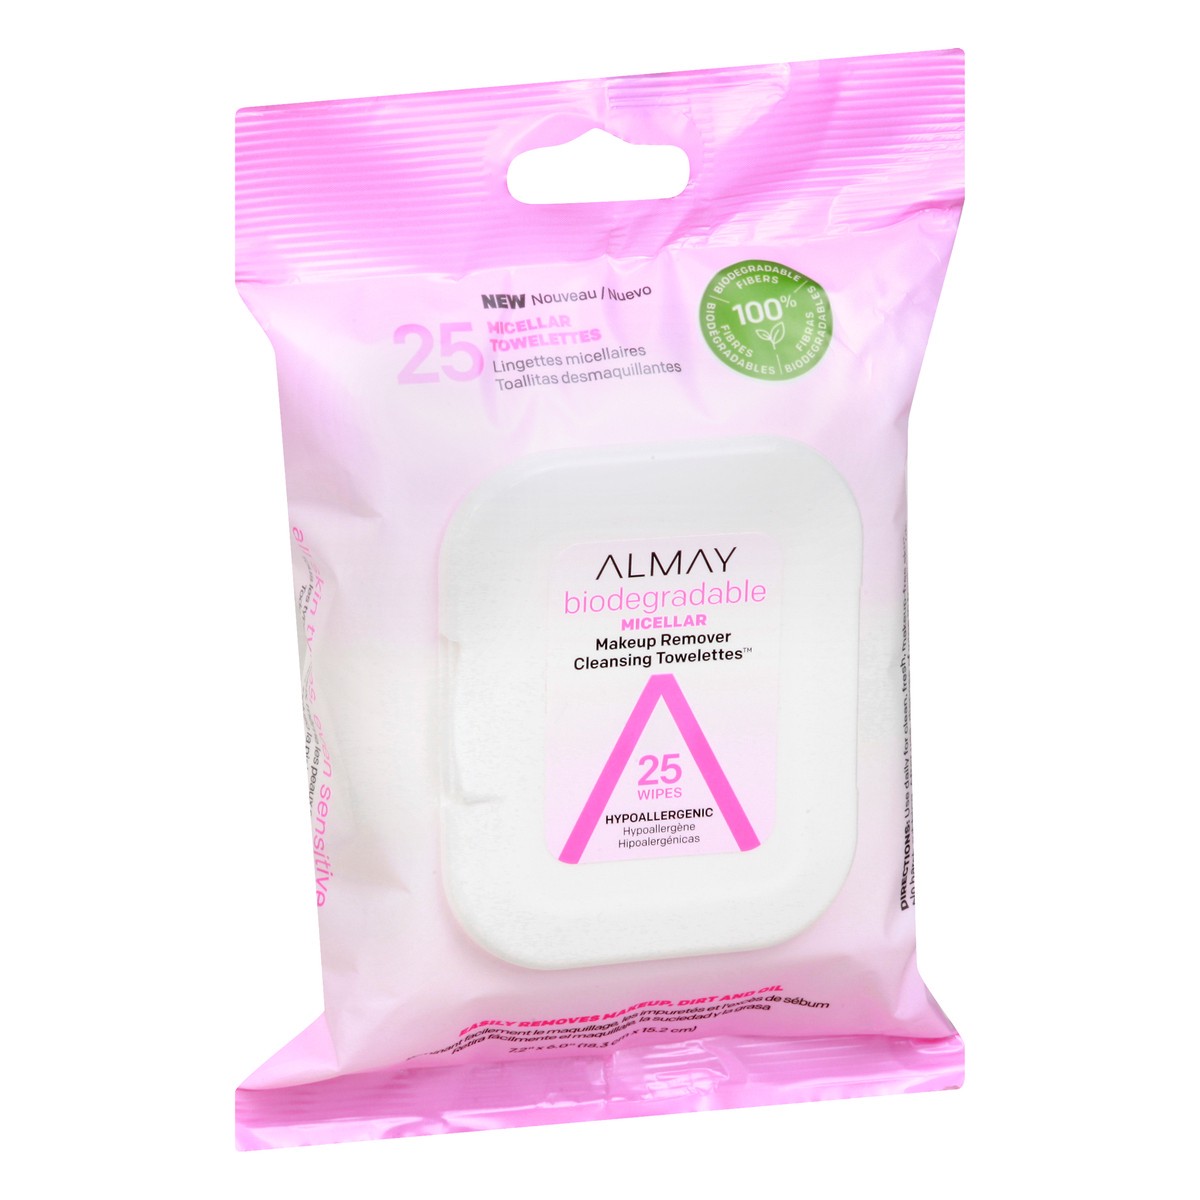 slide 2 of 9, Almay Biodegradable Micellar Makeup Remover Cleansing Towelettes, 25 ct